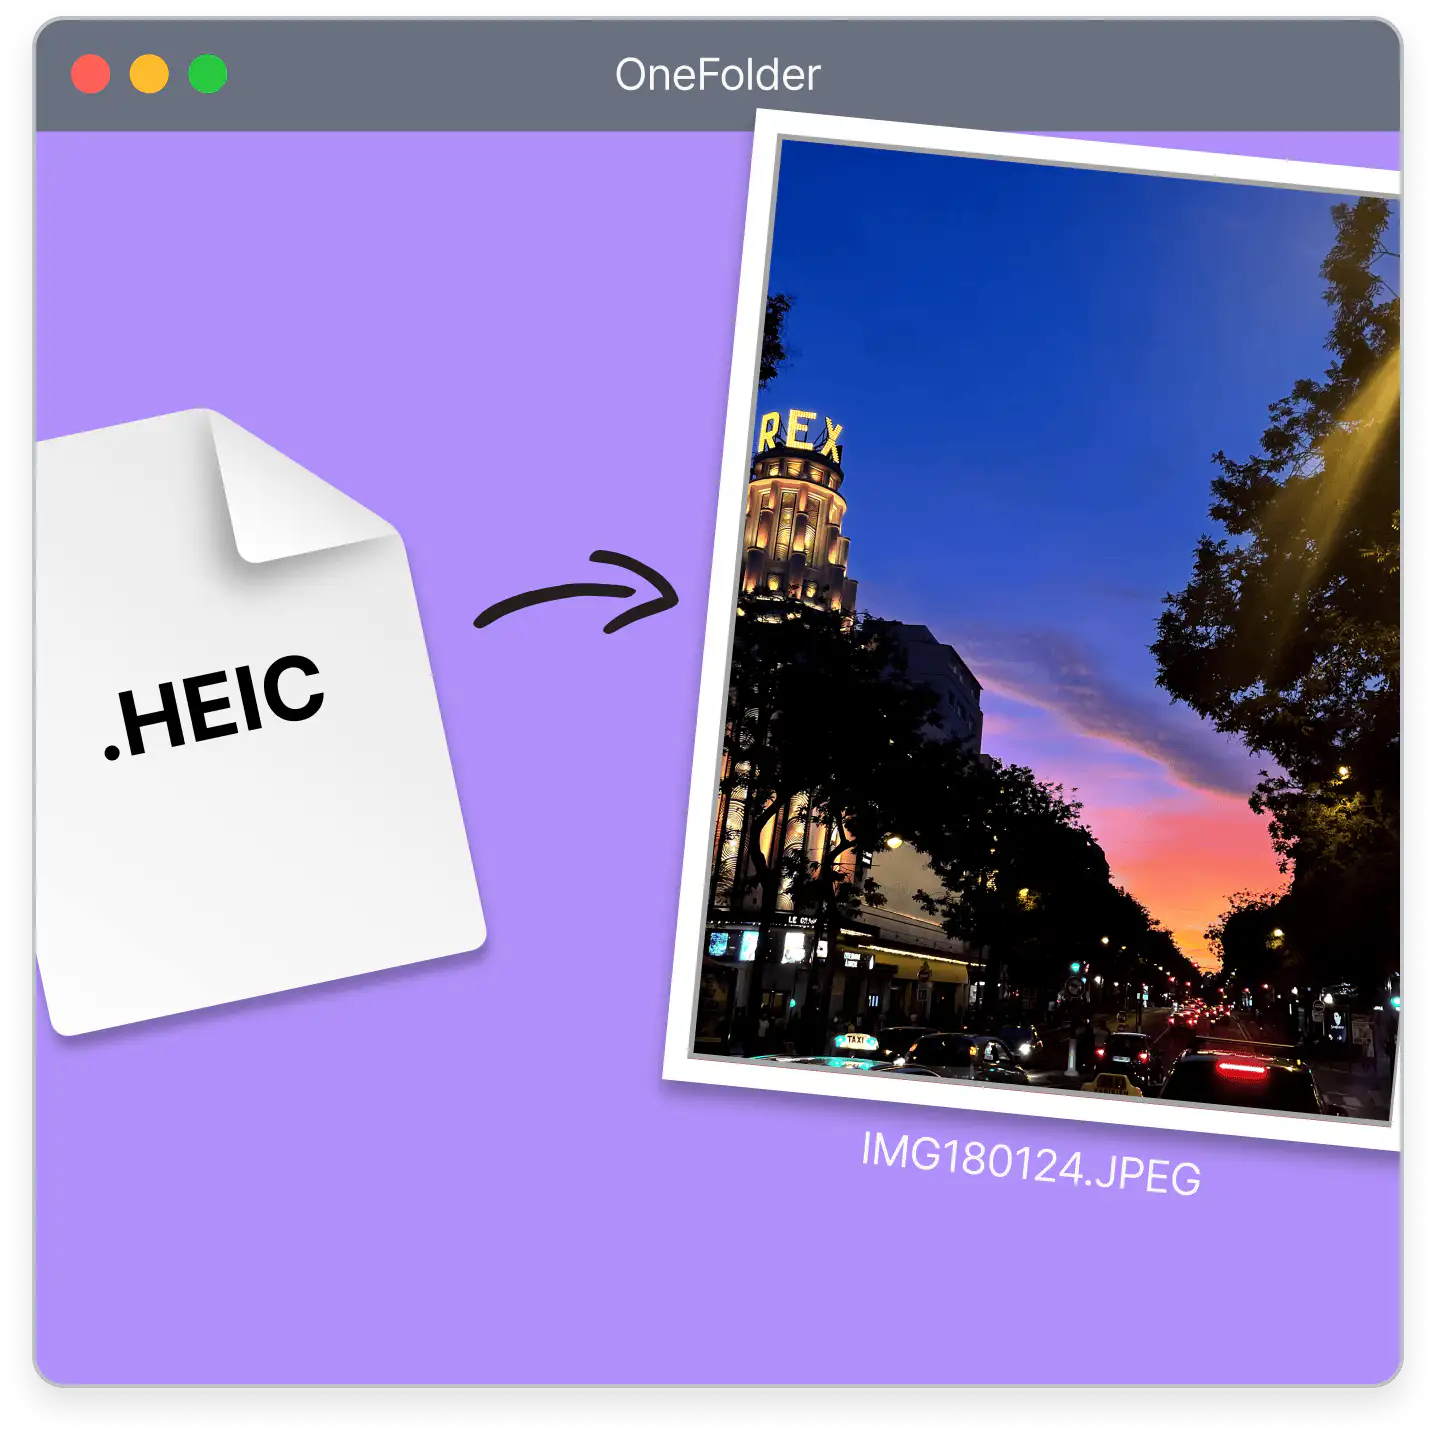 Easily preview all your HEIC photos. If you want, you can even convert them easily into JPEG.